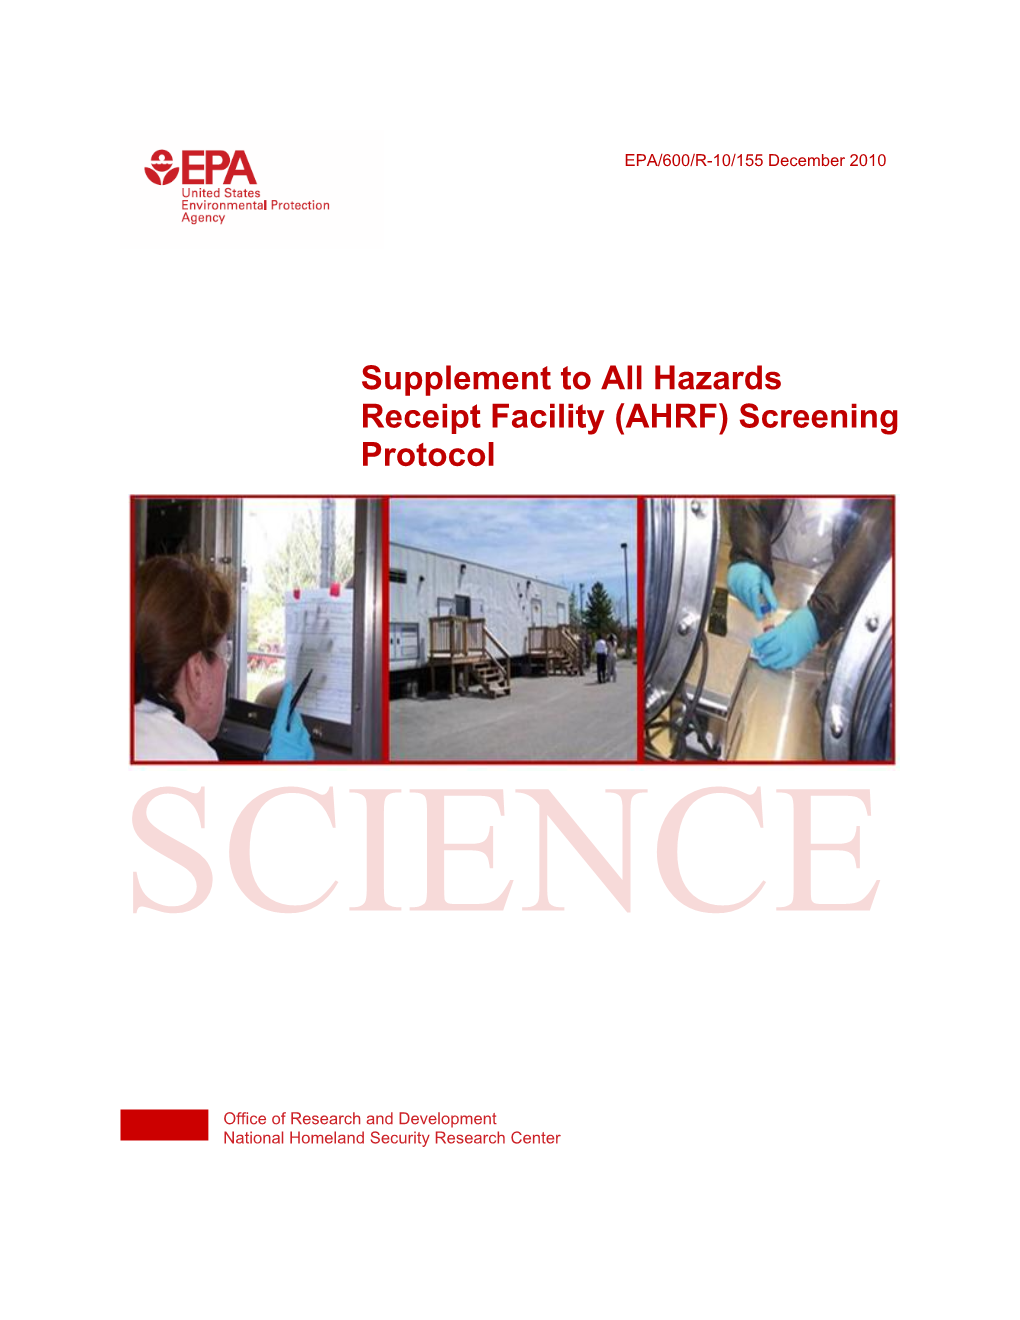 Supplement to All Hazards Receipt Facility (AHRF) Screening Protocol